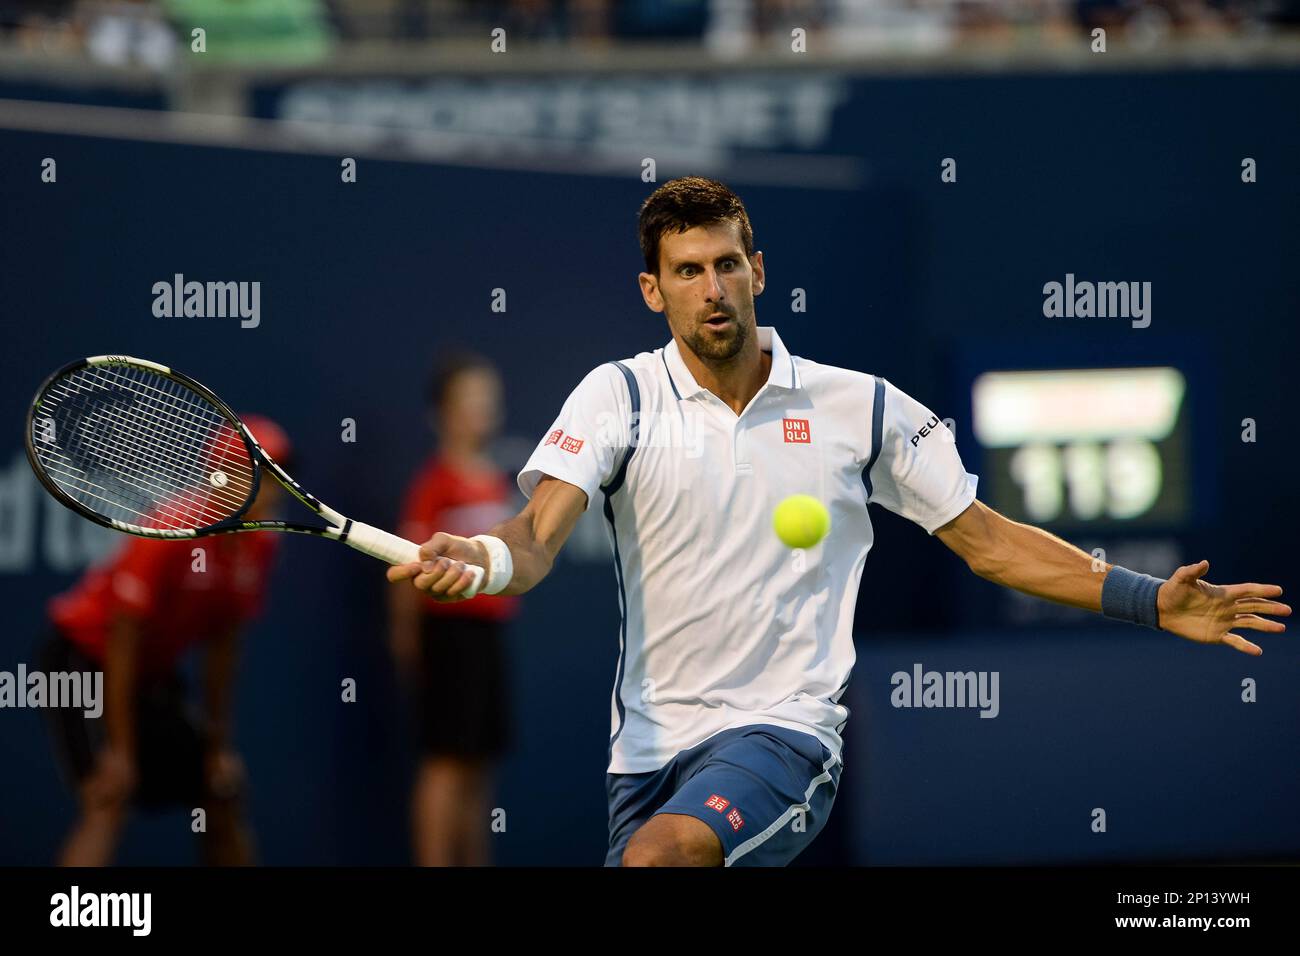 July 30, 2016 Novak Djokovic of Serbia and Montenegro returns the ball to Gael Monfils of France during their semifinal match of the Rogers Cup tournament at the Aviva Centre in Toronto,